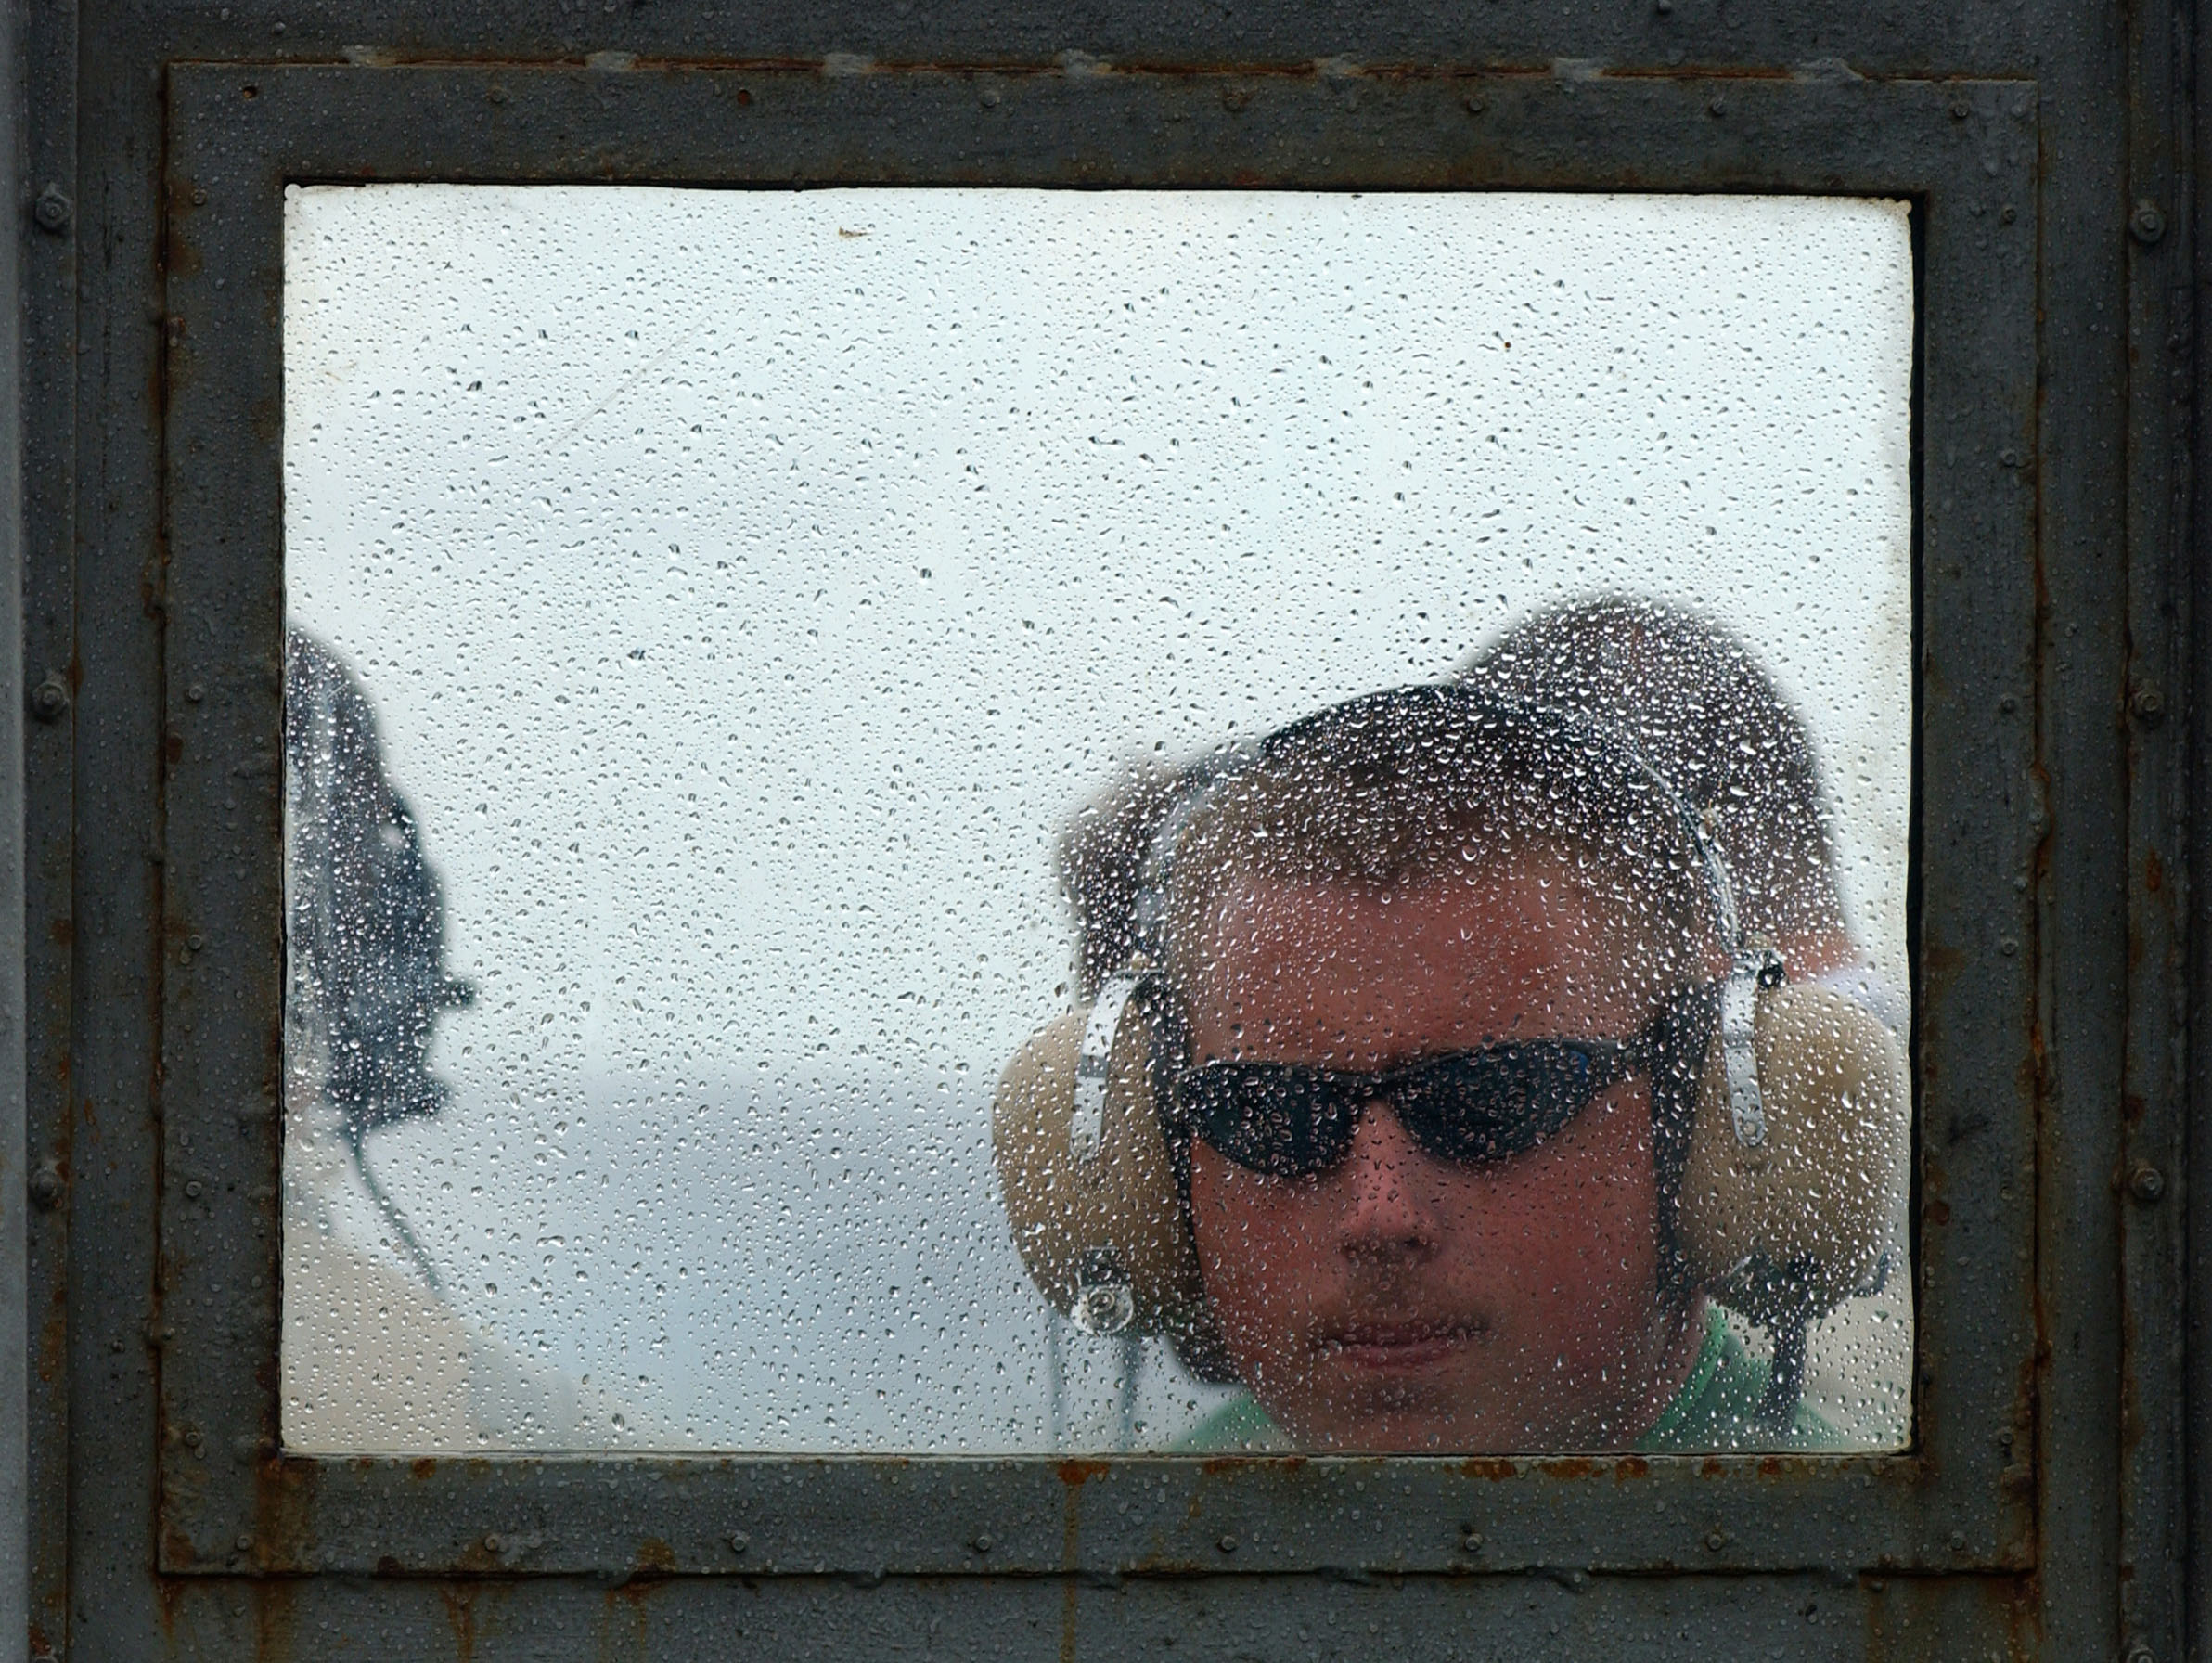 US Navy 050718-N-5345W-055 A Sailor assigned to the Air Department looks through the rain-spattered windshield glass on the Landing Signal Officer (LSO) platform during flight operations